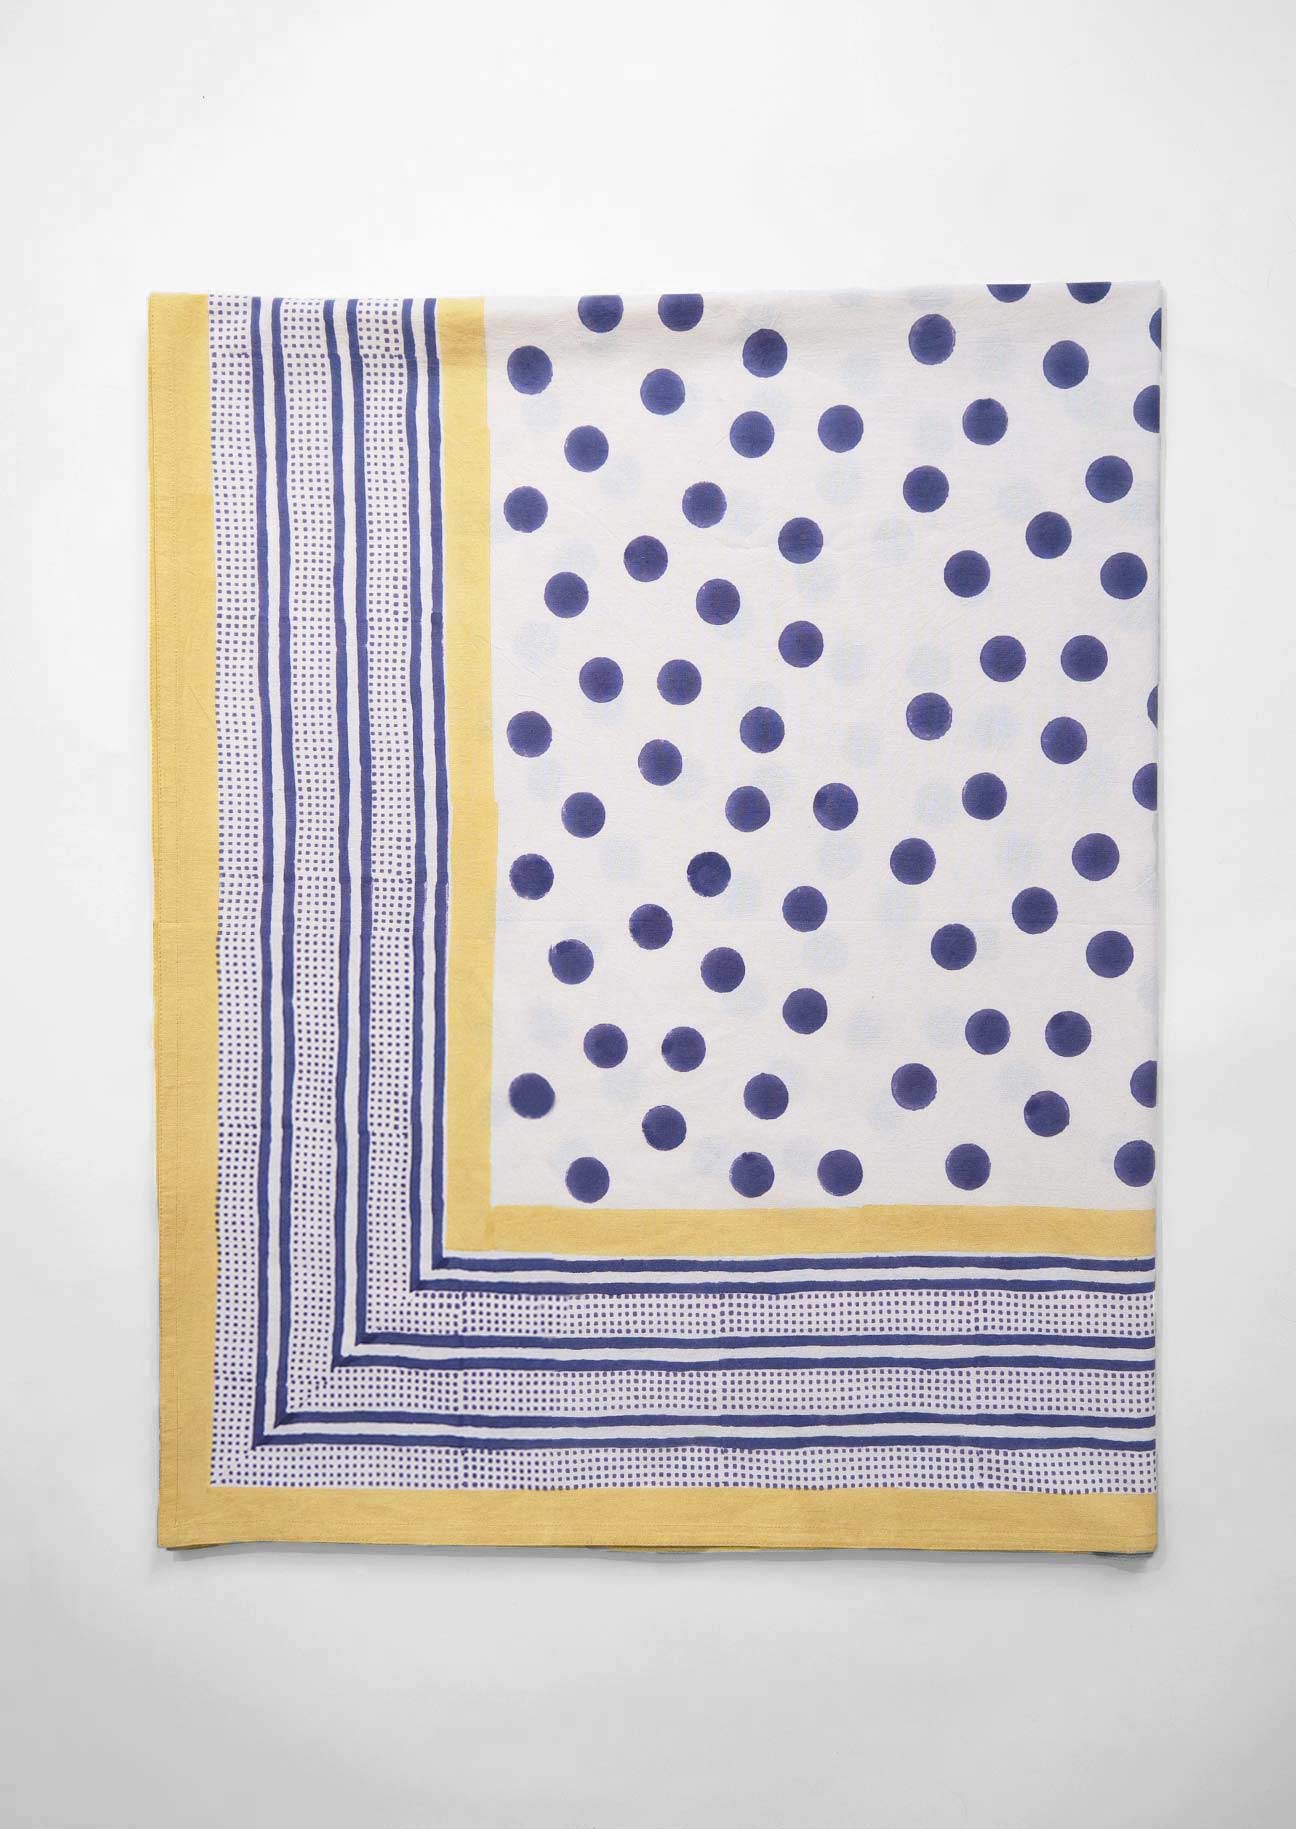 Hand block printed tablecloth in navy dot and yellow border on white ground.